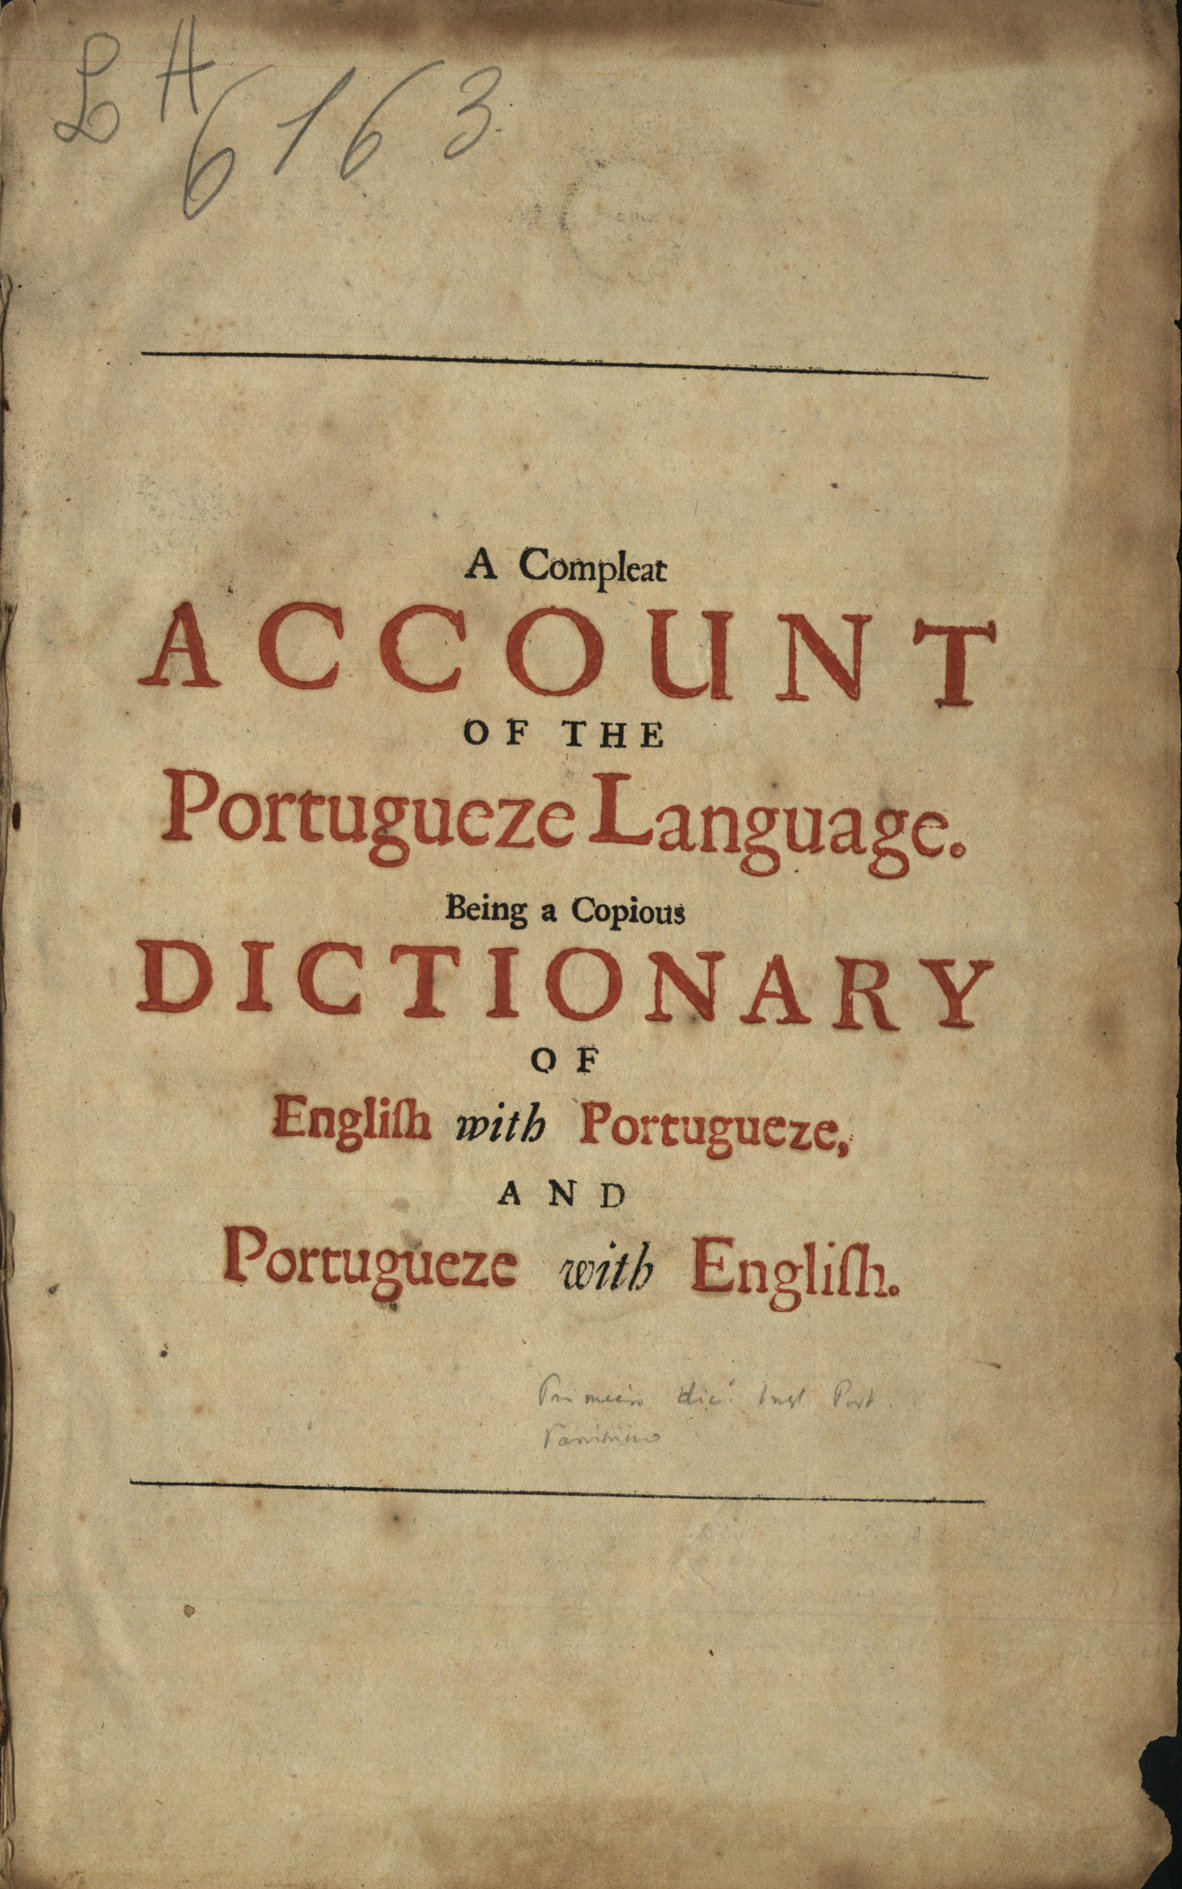 Cover of A Compleat account of the Portugueze Language / by A. J.. - London : printed by R. Janeway, for the Author, 1701. - [219] f. ; 2º (33 cm)